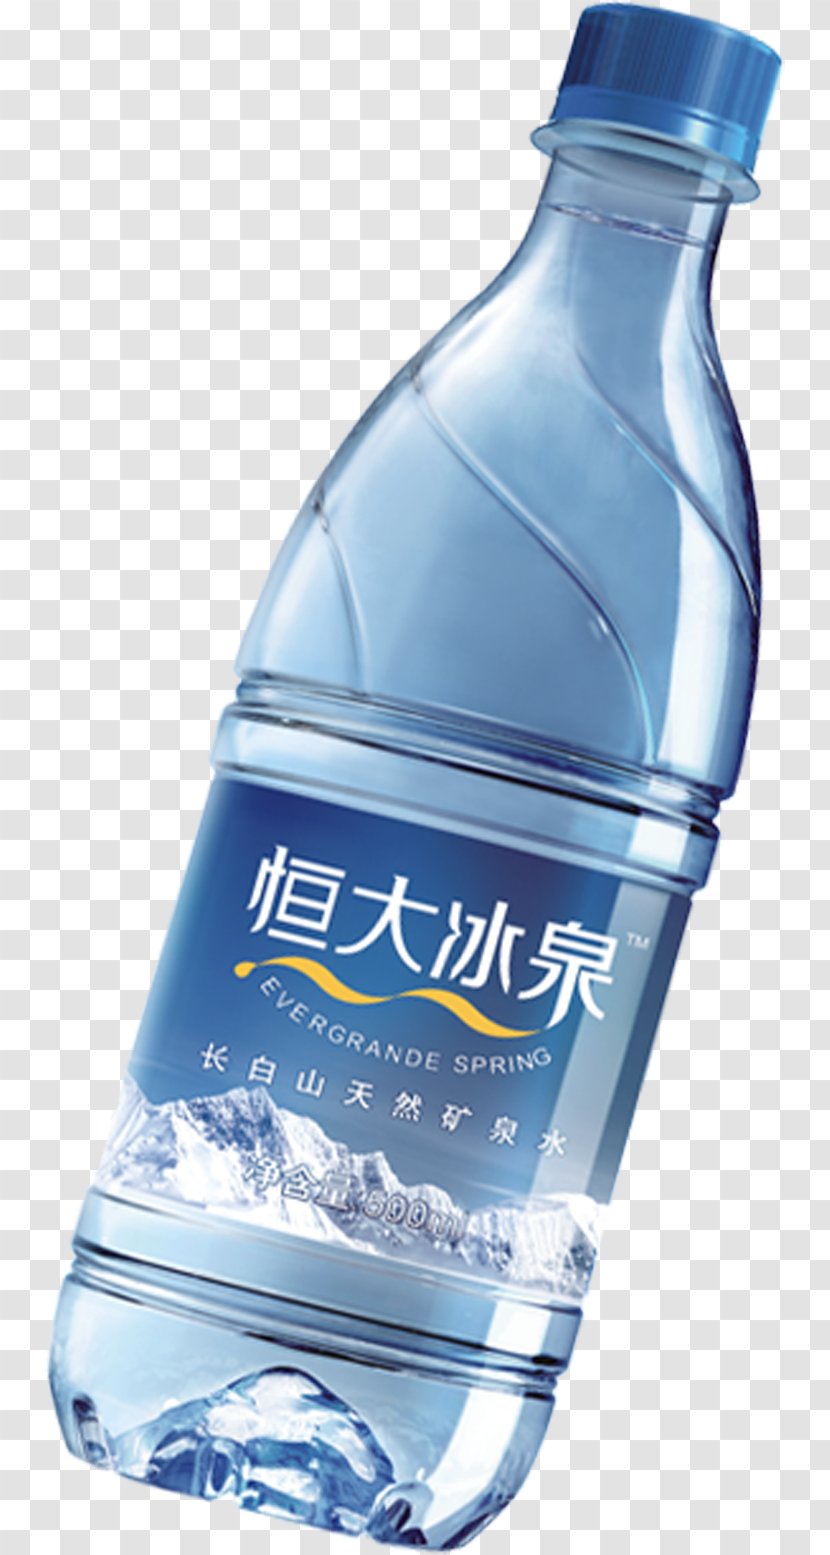 Mineral Water Bottle Cap - Blue For Photography Transparent PNG